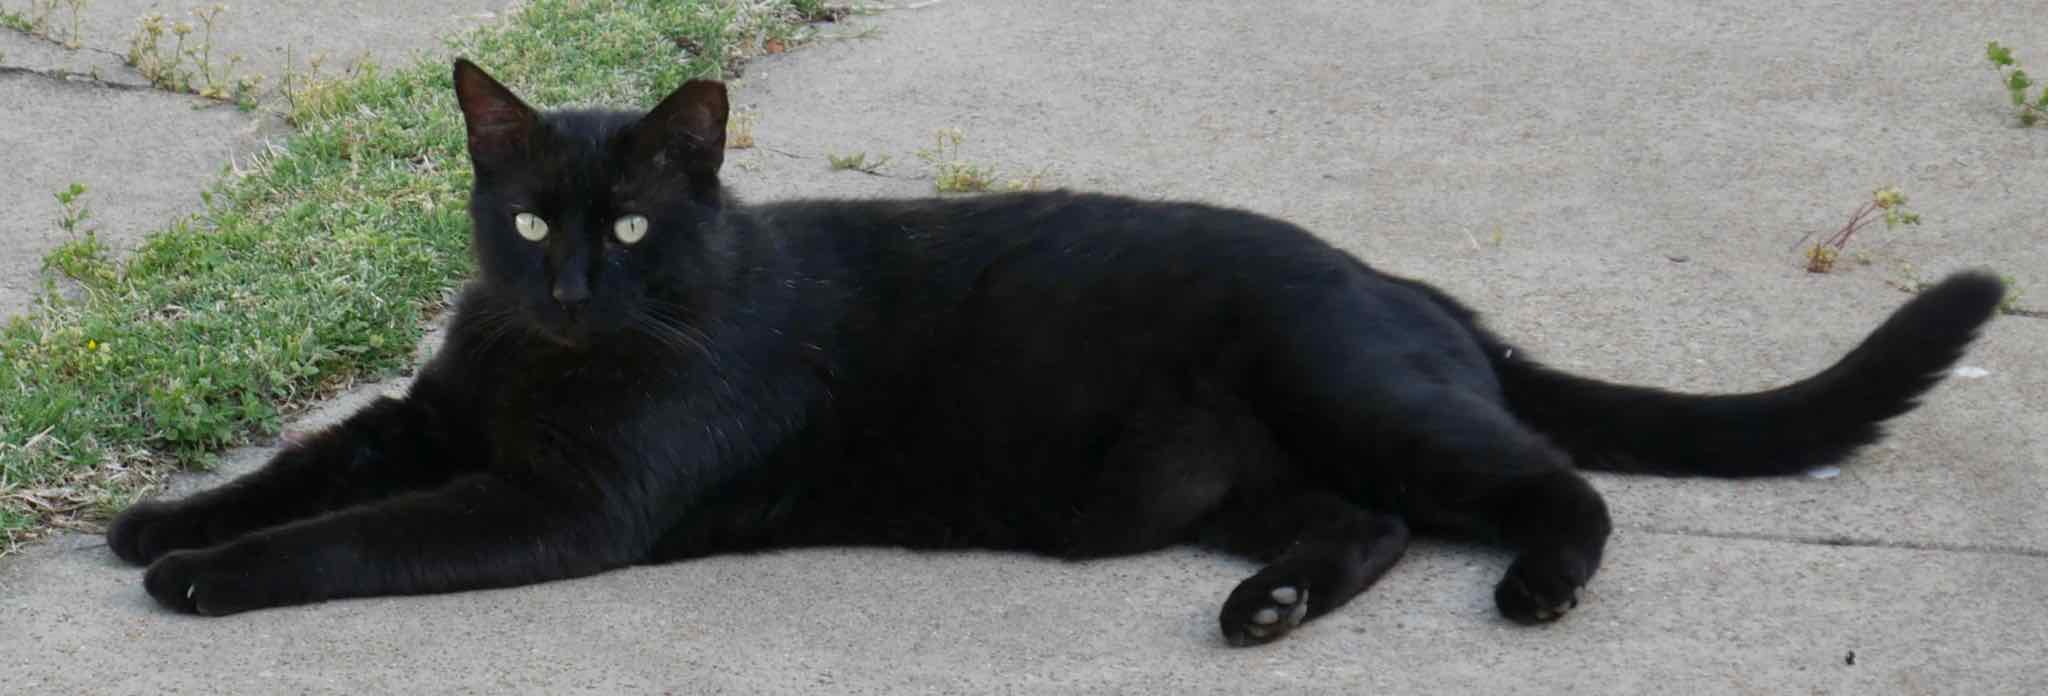 black cat stretched out on concrete driveway